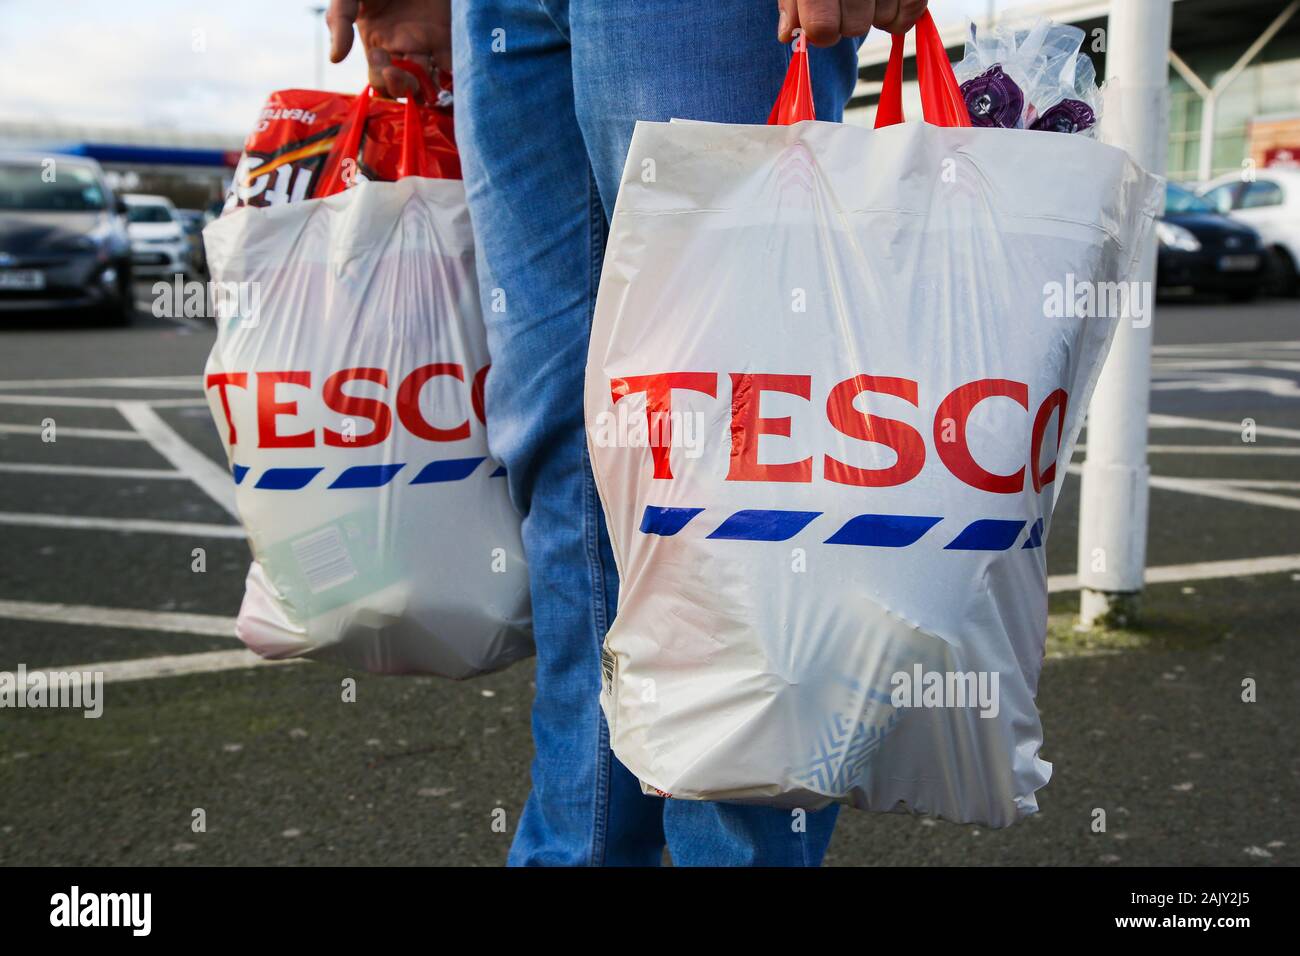 Tesco's cheapest carrier bag to cost 10p - BBC News